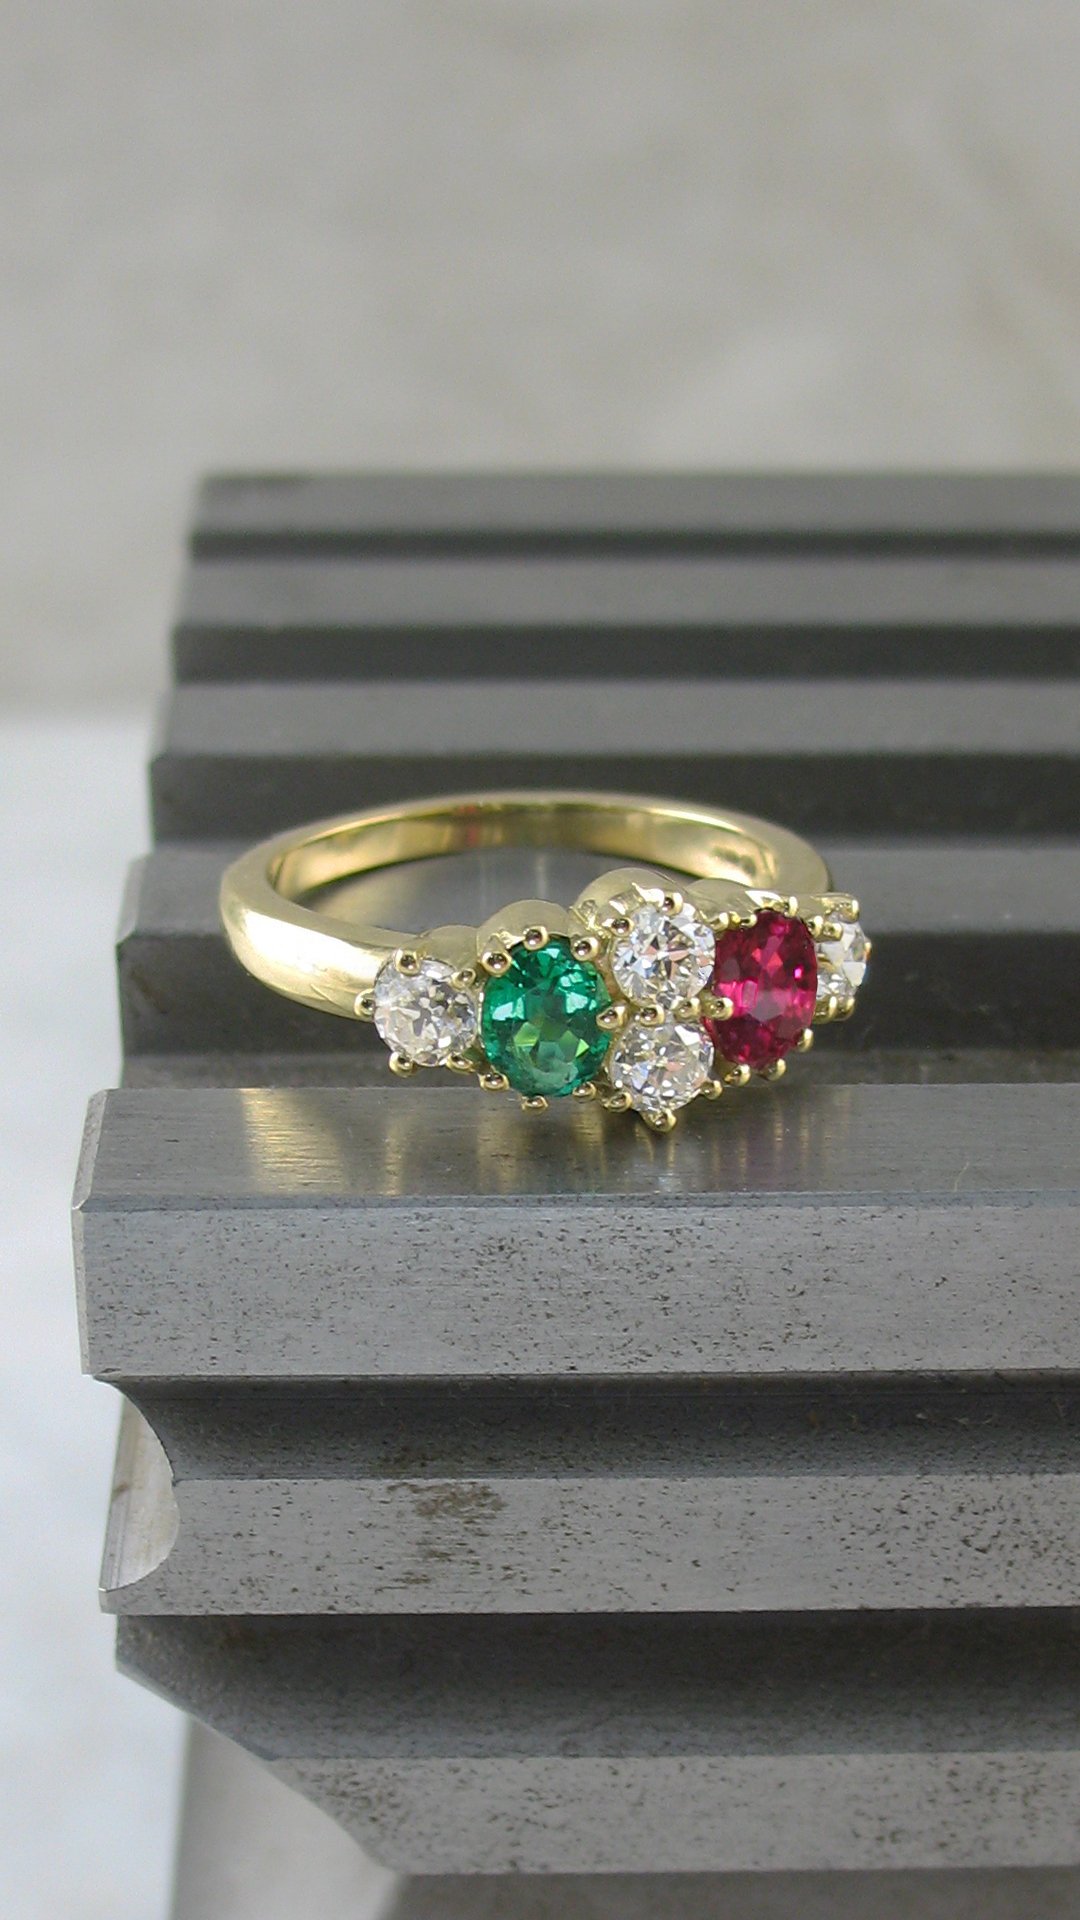 A stunning vintage inspired diamond, ruby and emerald engagement ring